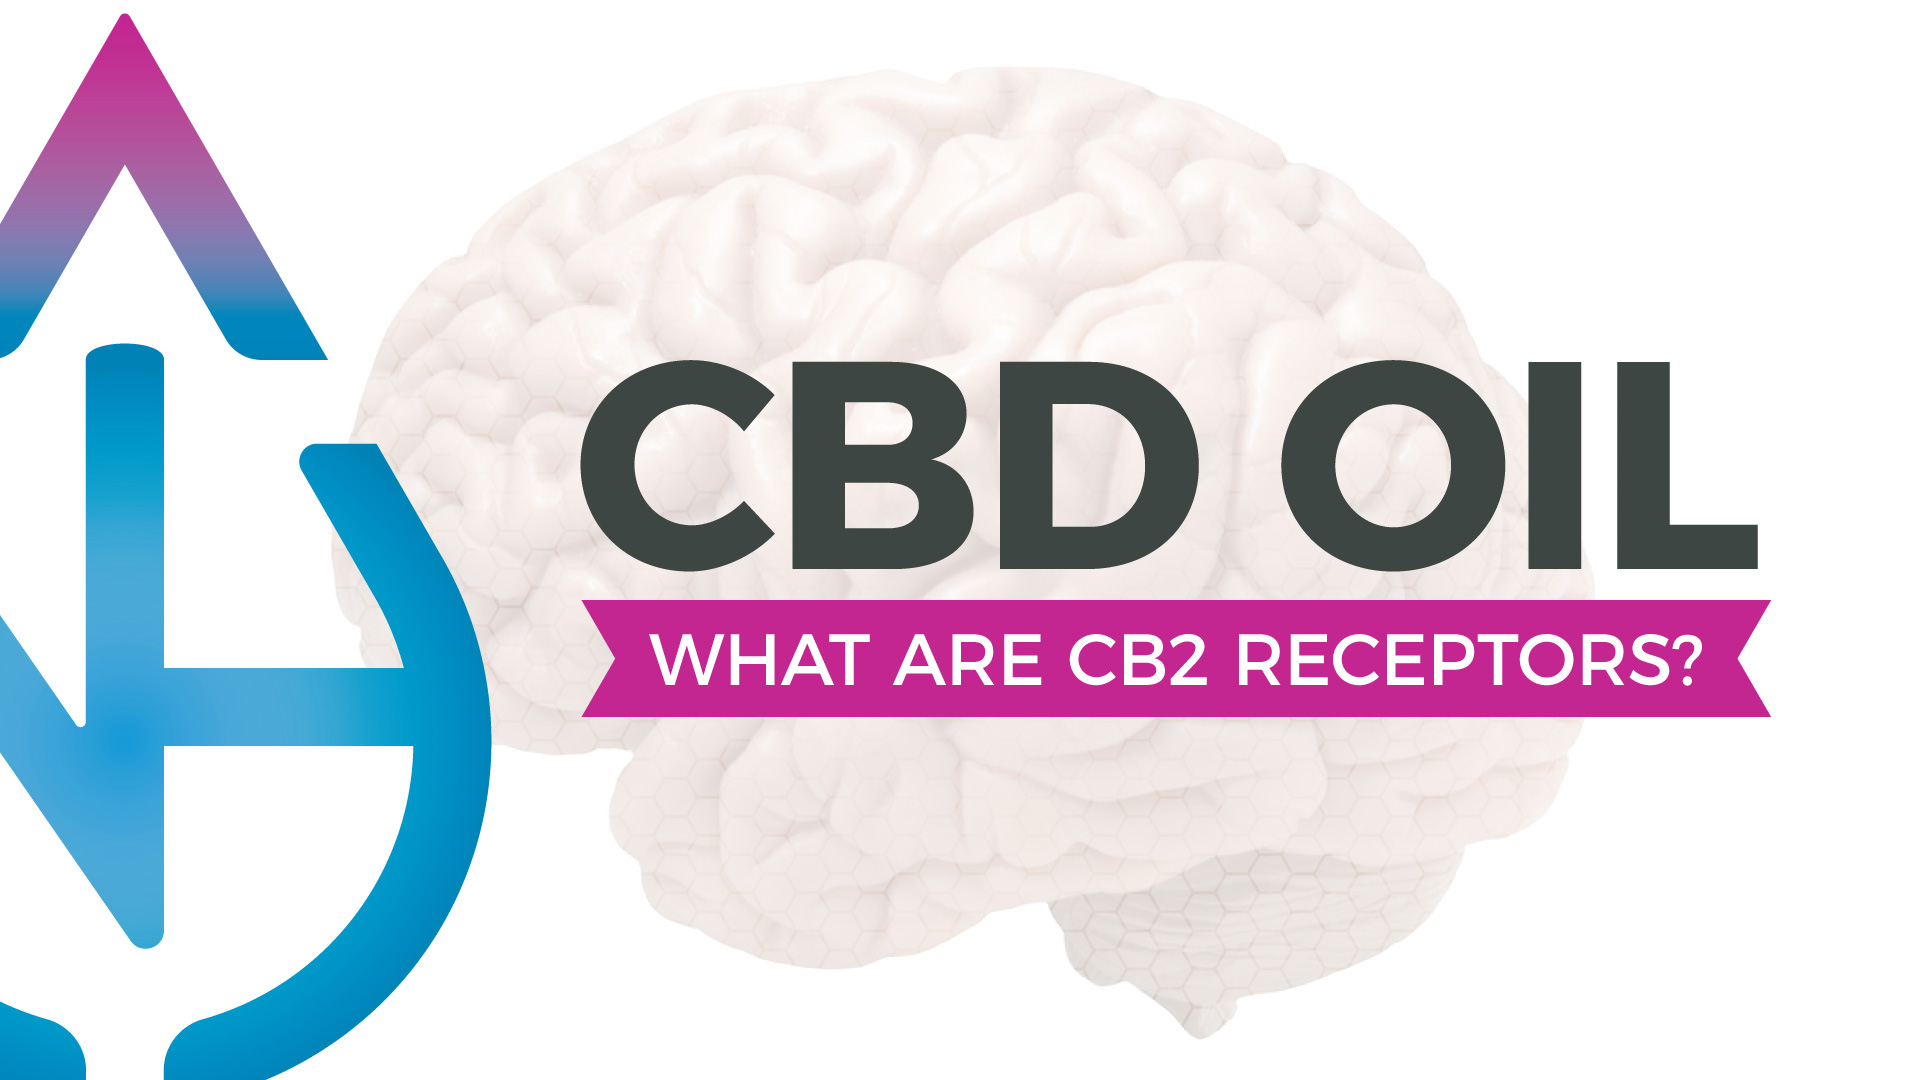 What Are CB2 Receptors?